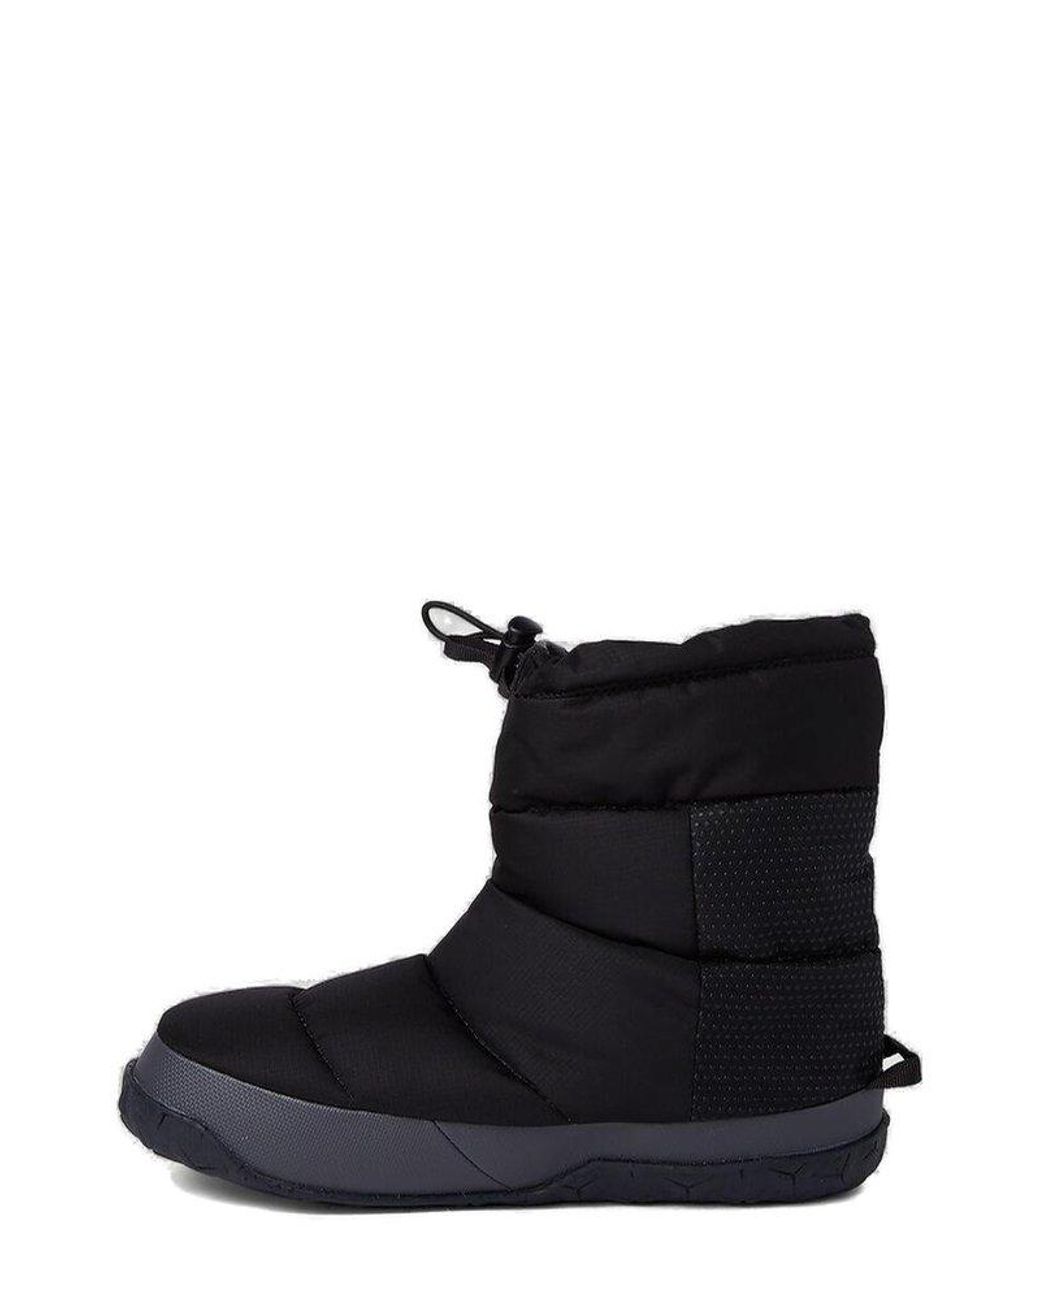 The North Face Nuptse Apres Boots in Black | Lyst